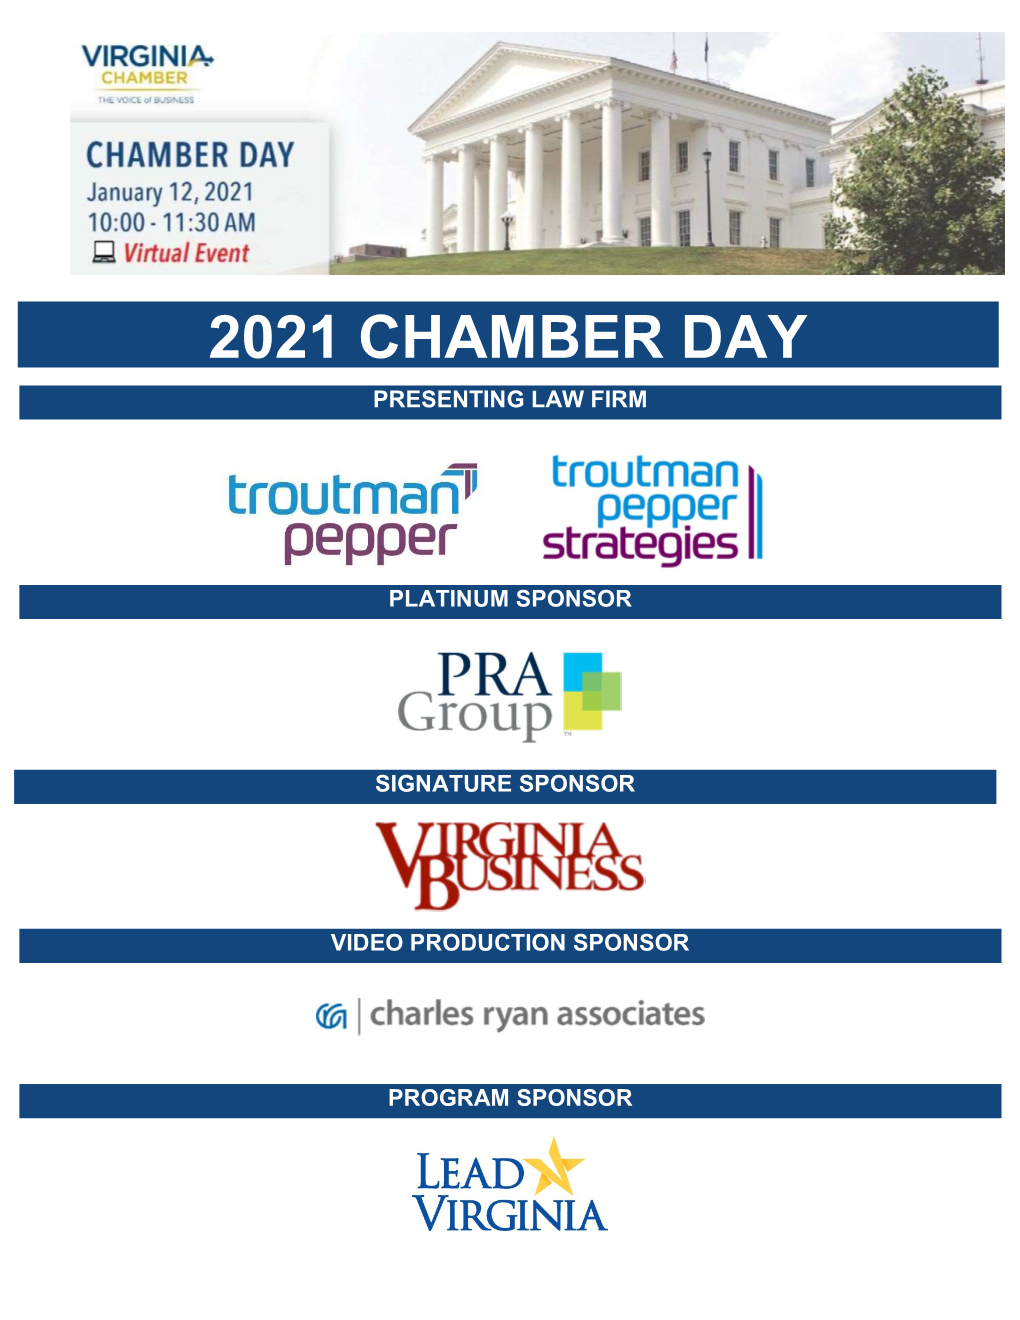 2021 Chamber Day Presenting Law Firm